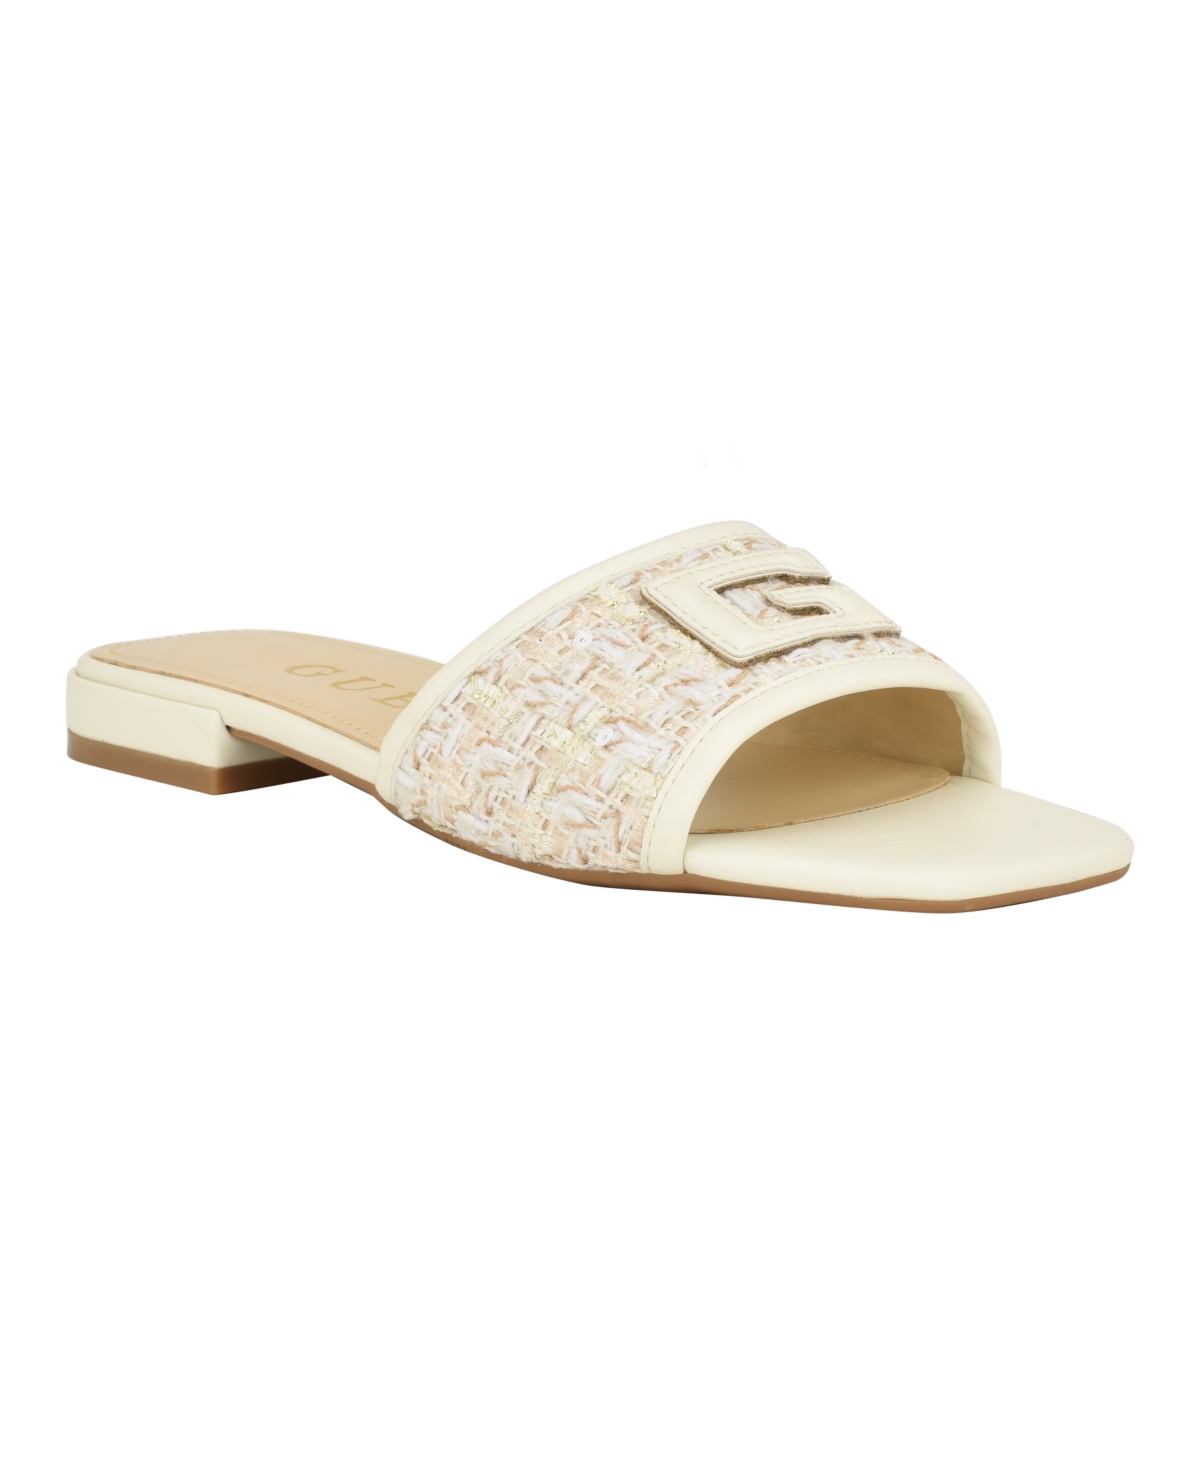 GUESS WOMEN'S TAMPA SLIDE-ON SANDALS WITH WOVEN LOGO DETAIL